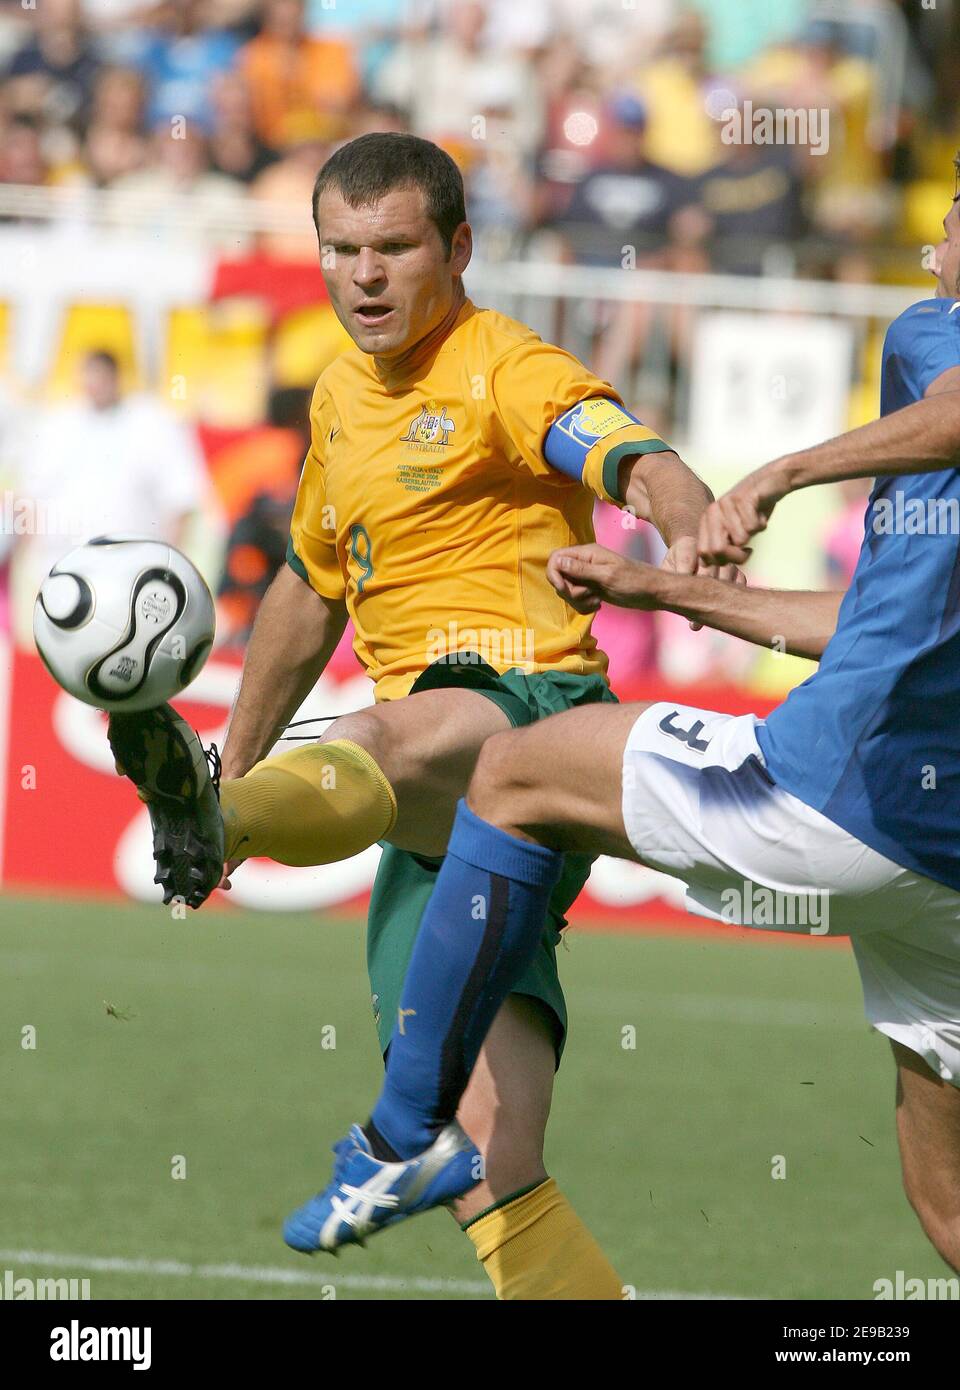 Australia's Mark Viduka during the World Cup 2006, Second round, Australia vs Italy at the Fritz-Walter-Stadion in Kaiserslautern, Germany on June 26, 2006. Italy won 1-0 on a last-minute penalty kick. Photo by Gouhier-Hahn-Orban/Cameleon/ABACAPRESS.COM Stock Photo